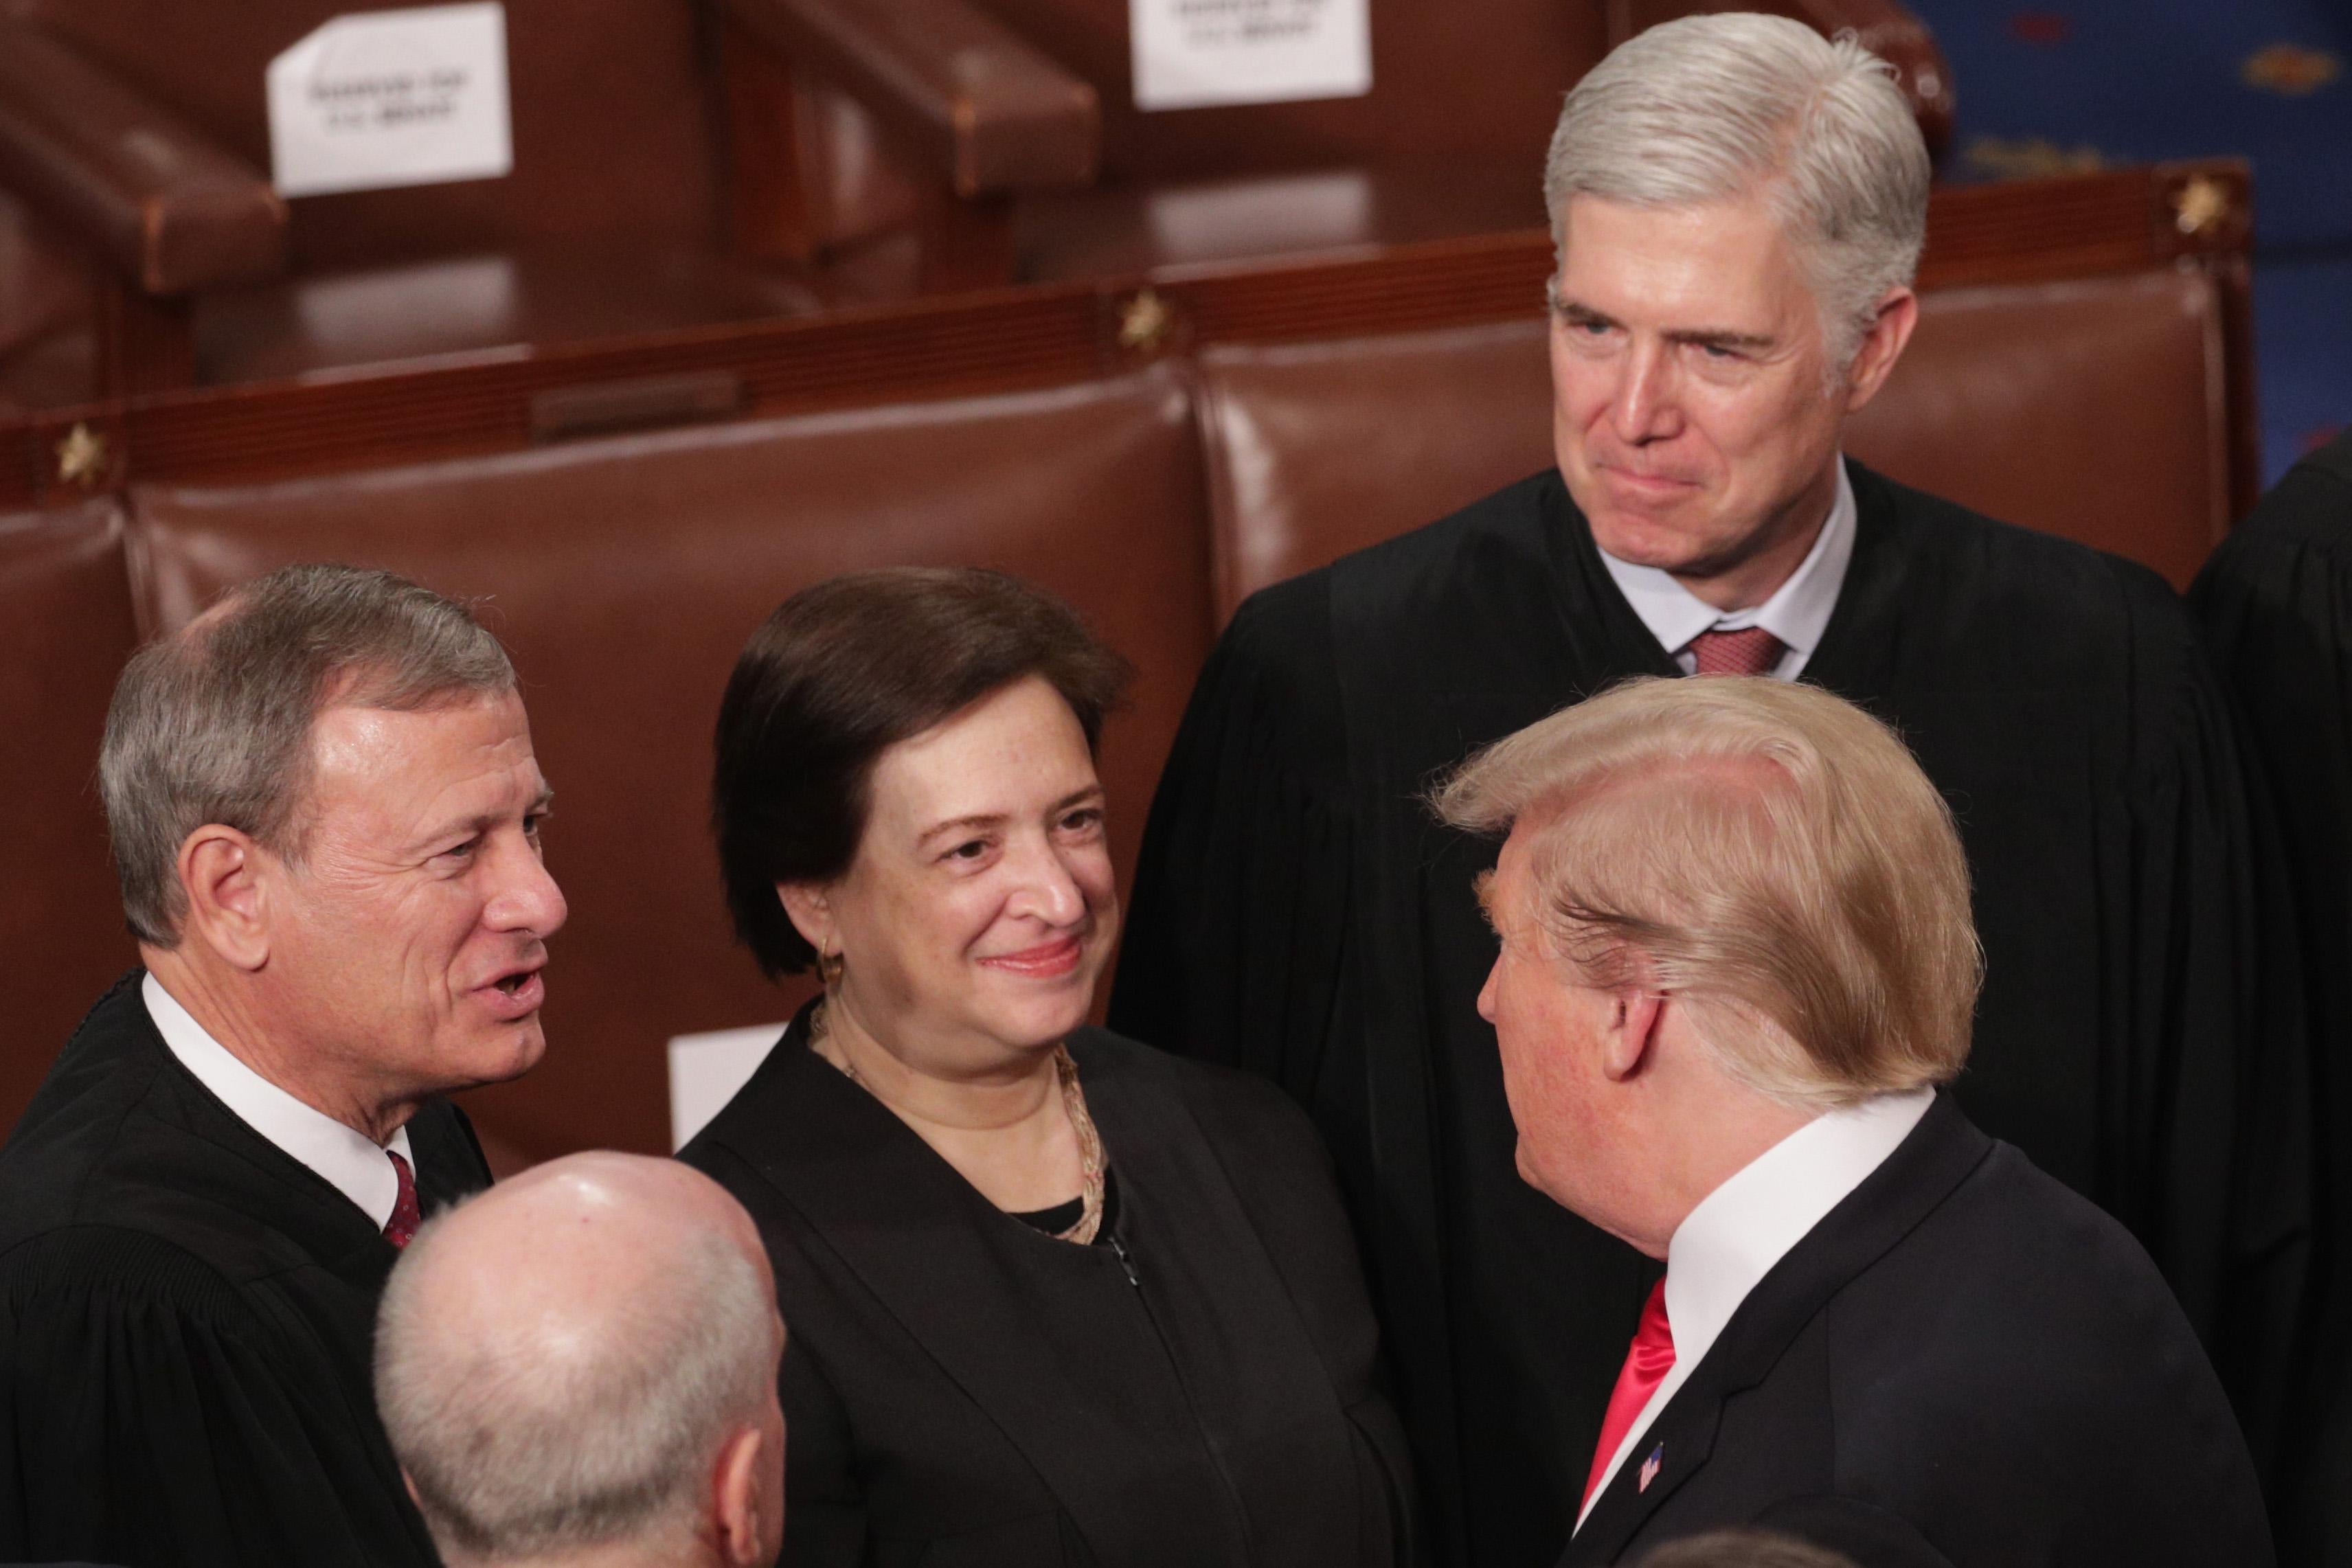 Supreme Court Justices John Roberts, Elena Kagan, and Neil Gorsuch greet President Donald Trump after the State of the Union address on Feb. 5 in Washington.